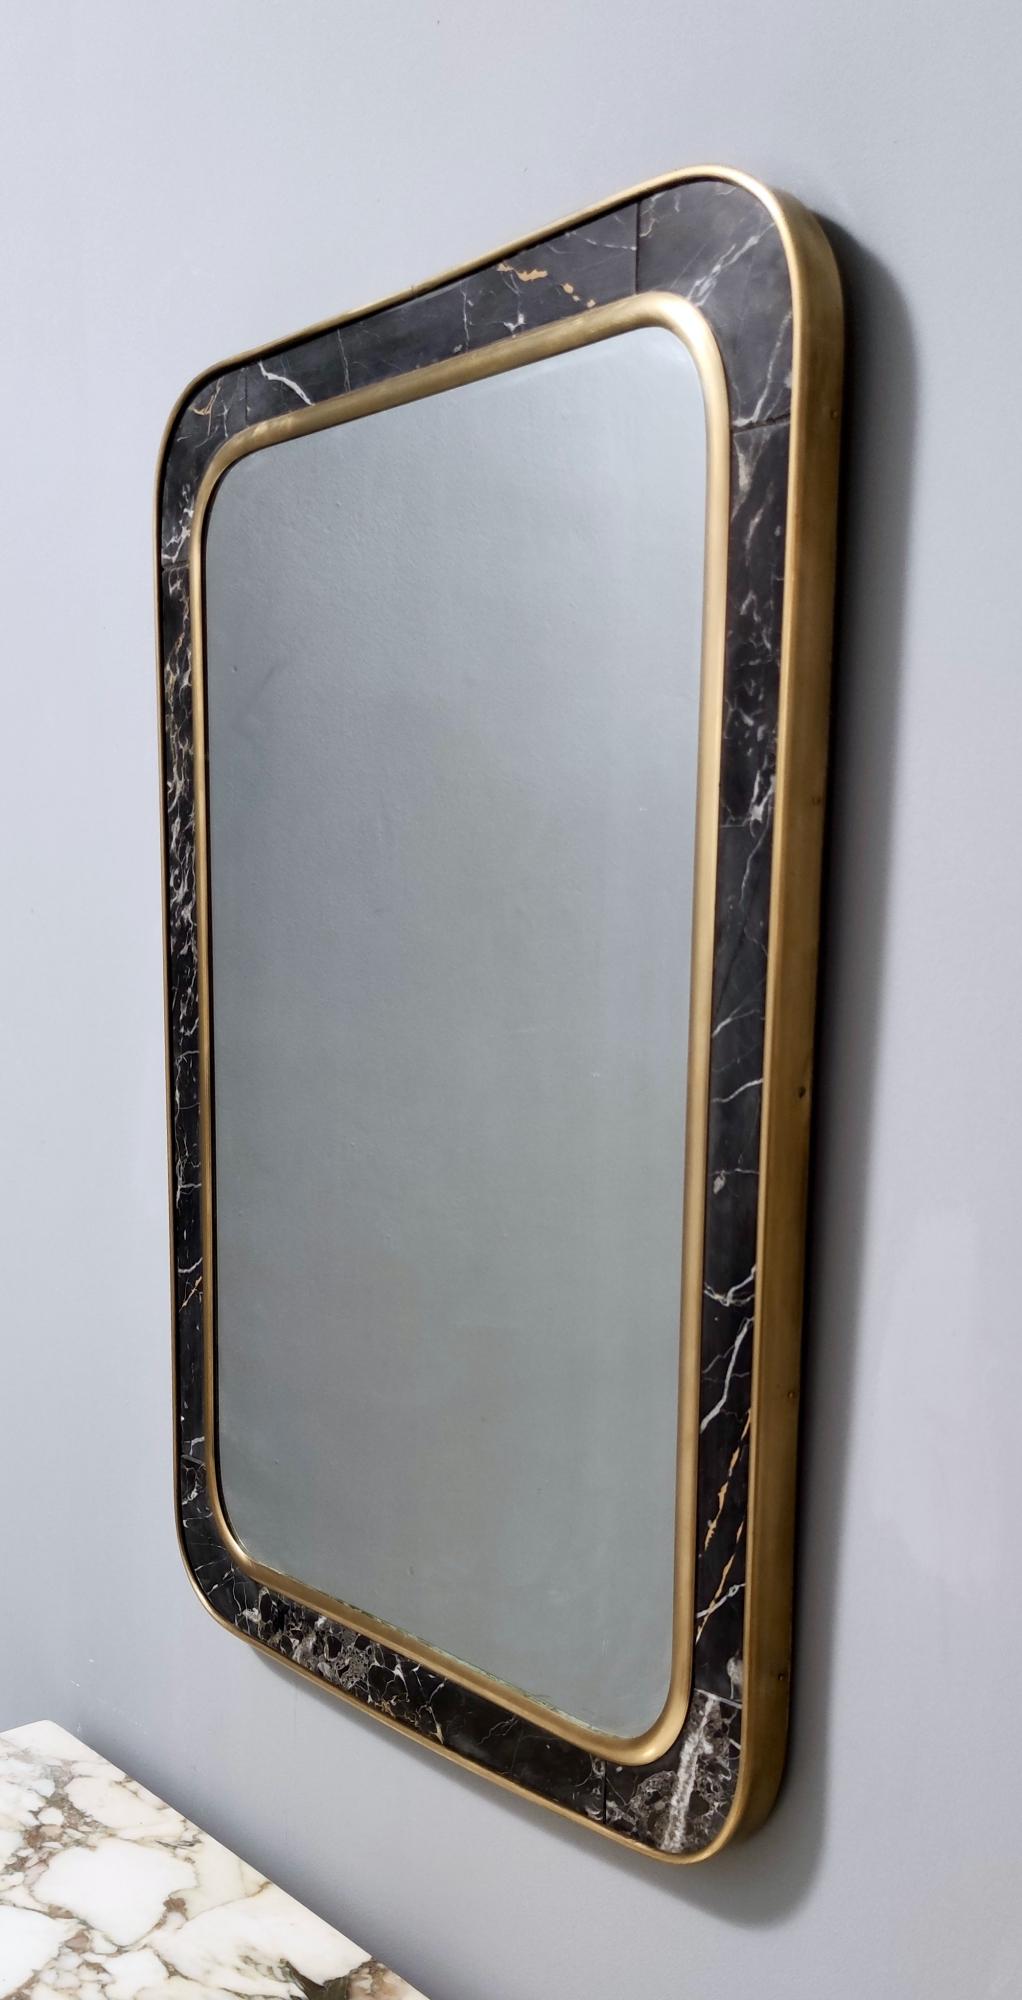 Mid-20th Century Midcentury Rectangular Wall Mirror with Brass and Black Portoro Marble Frame